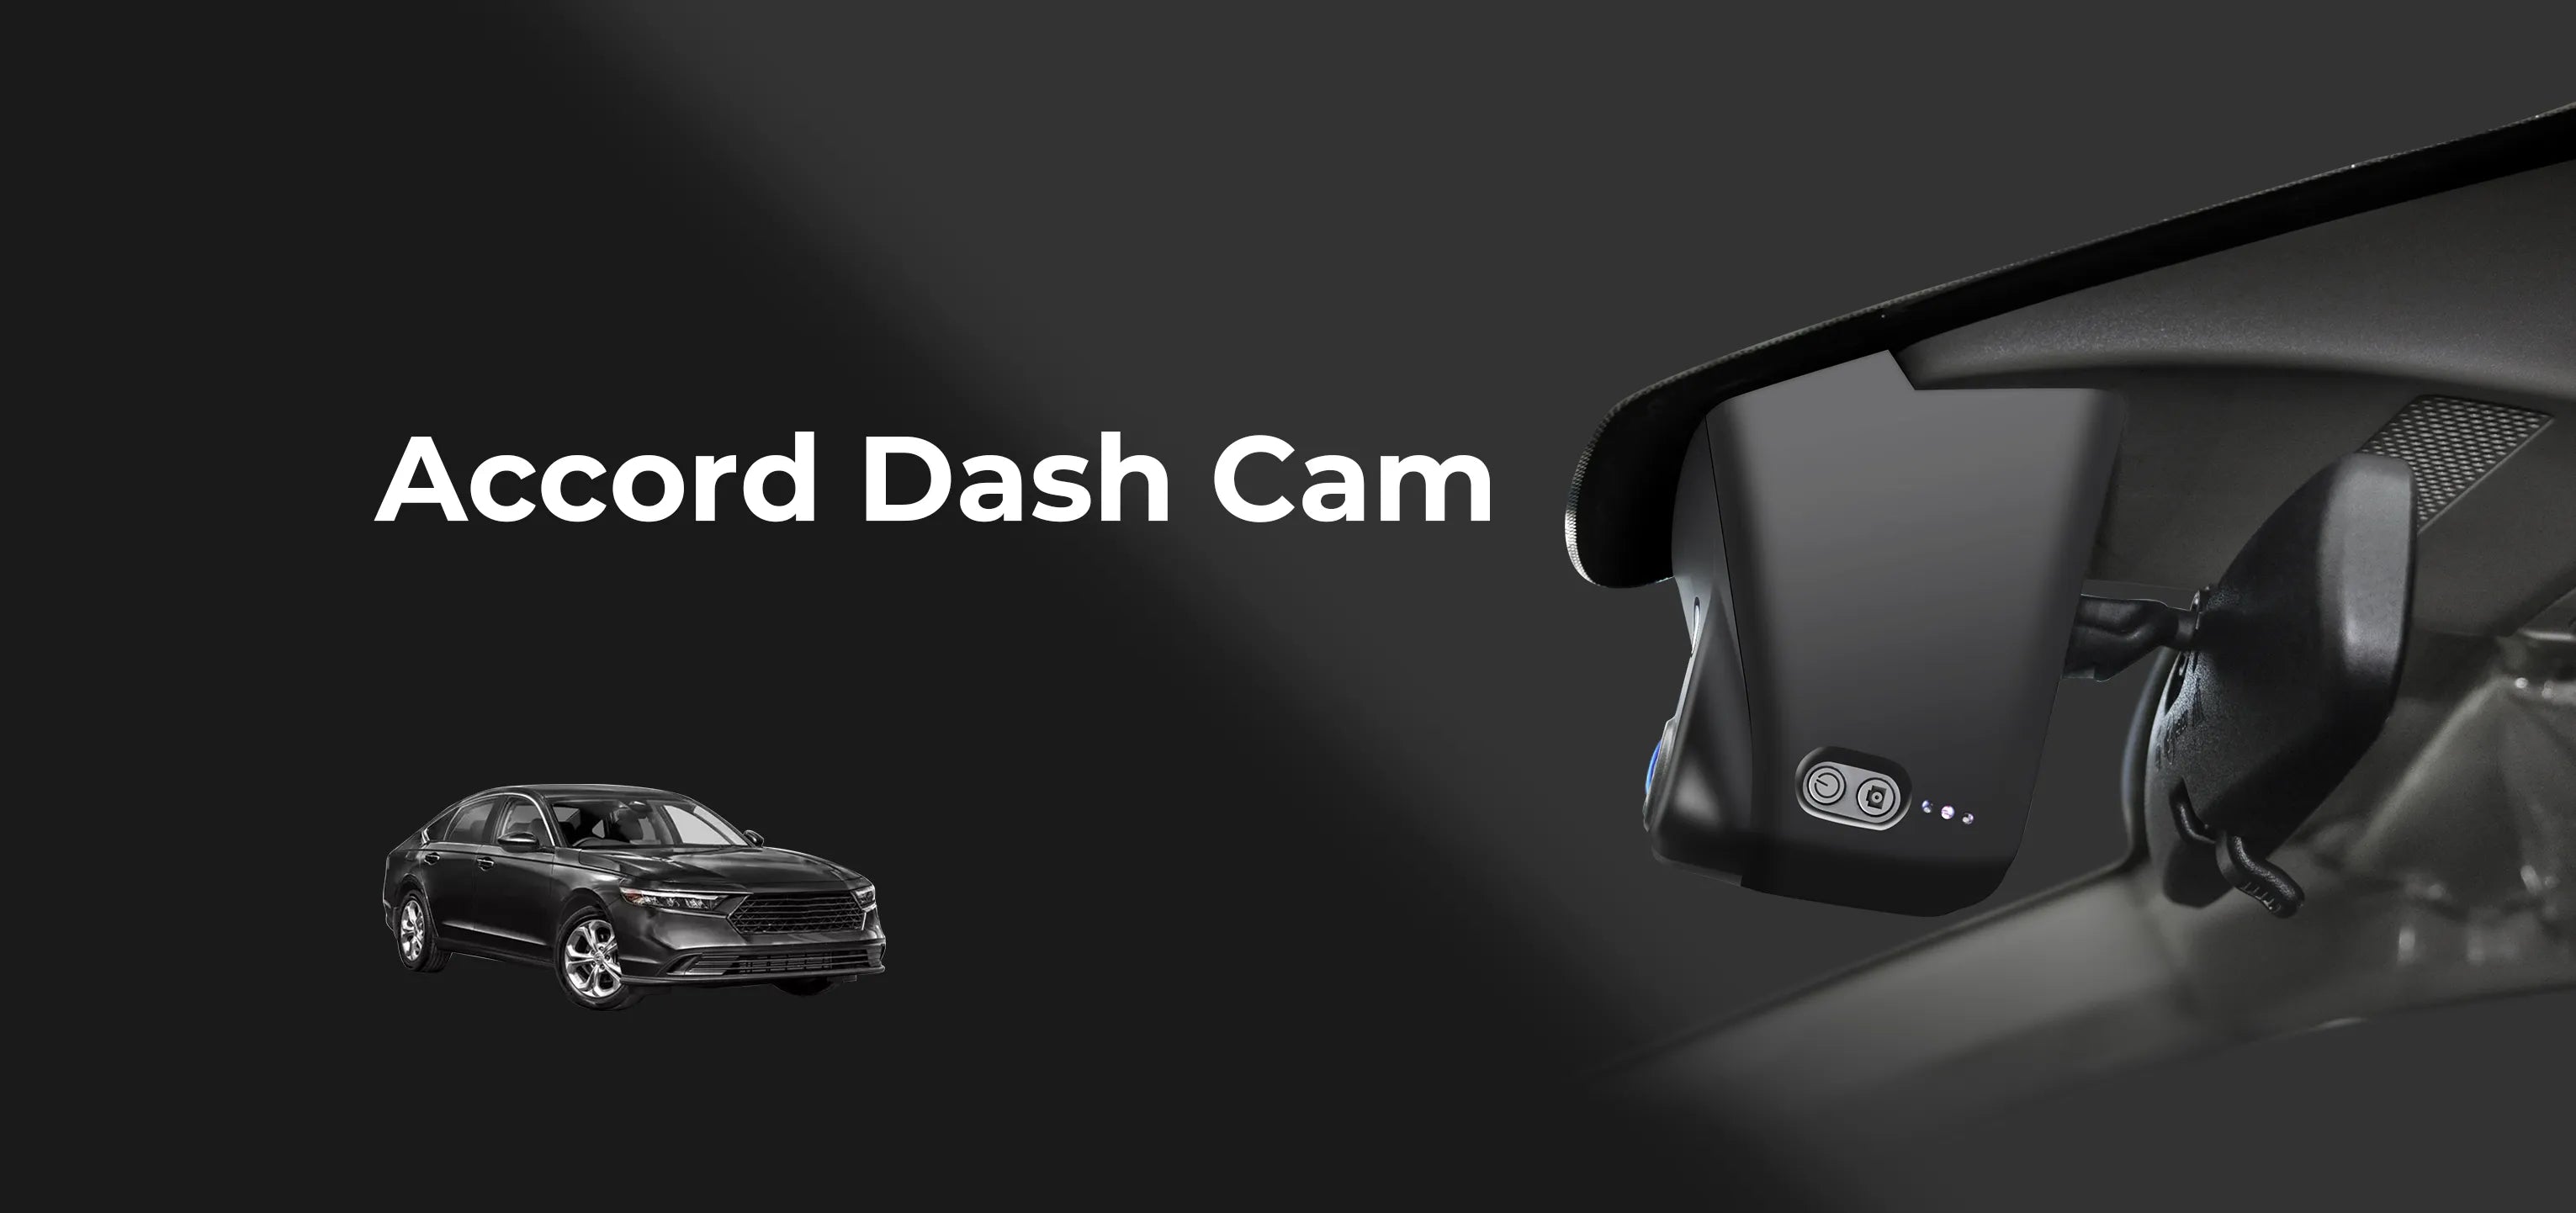 OEM style dash cam for Accord